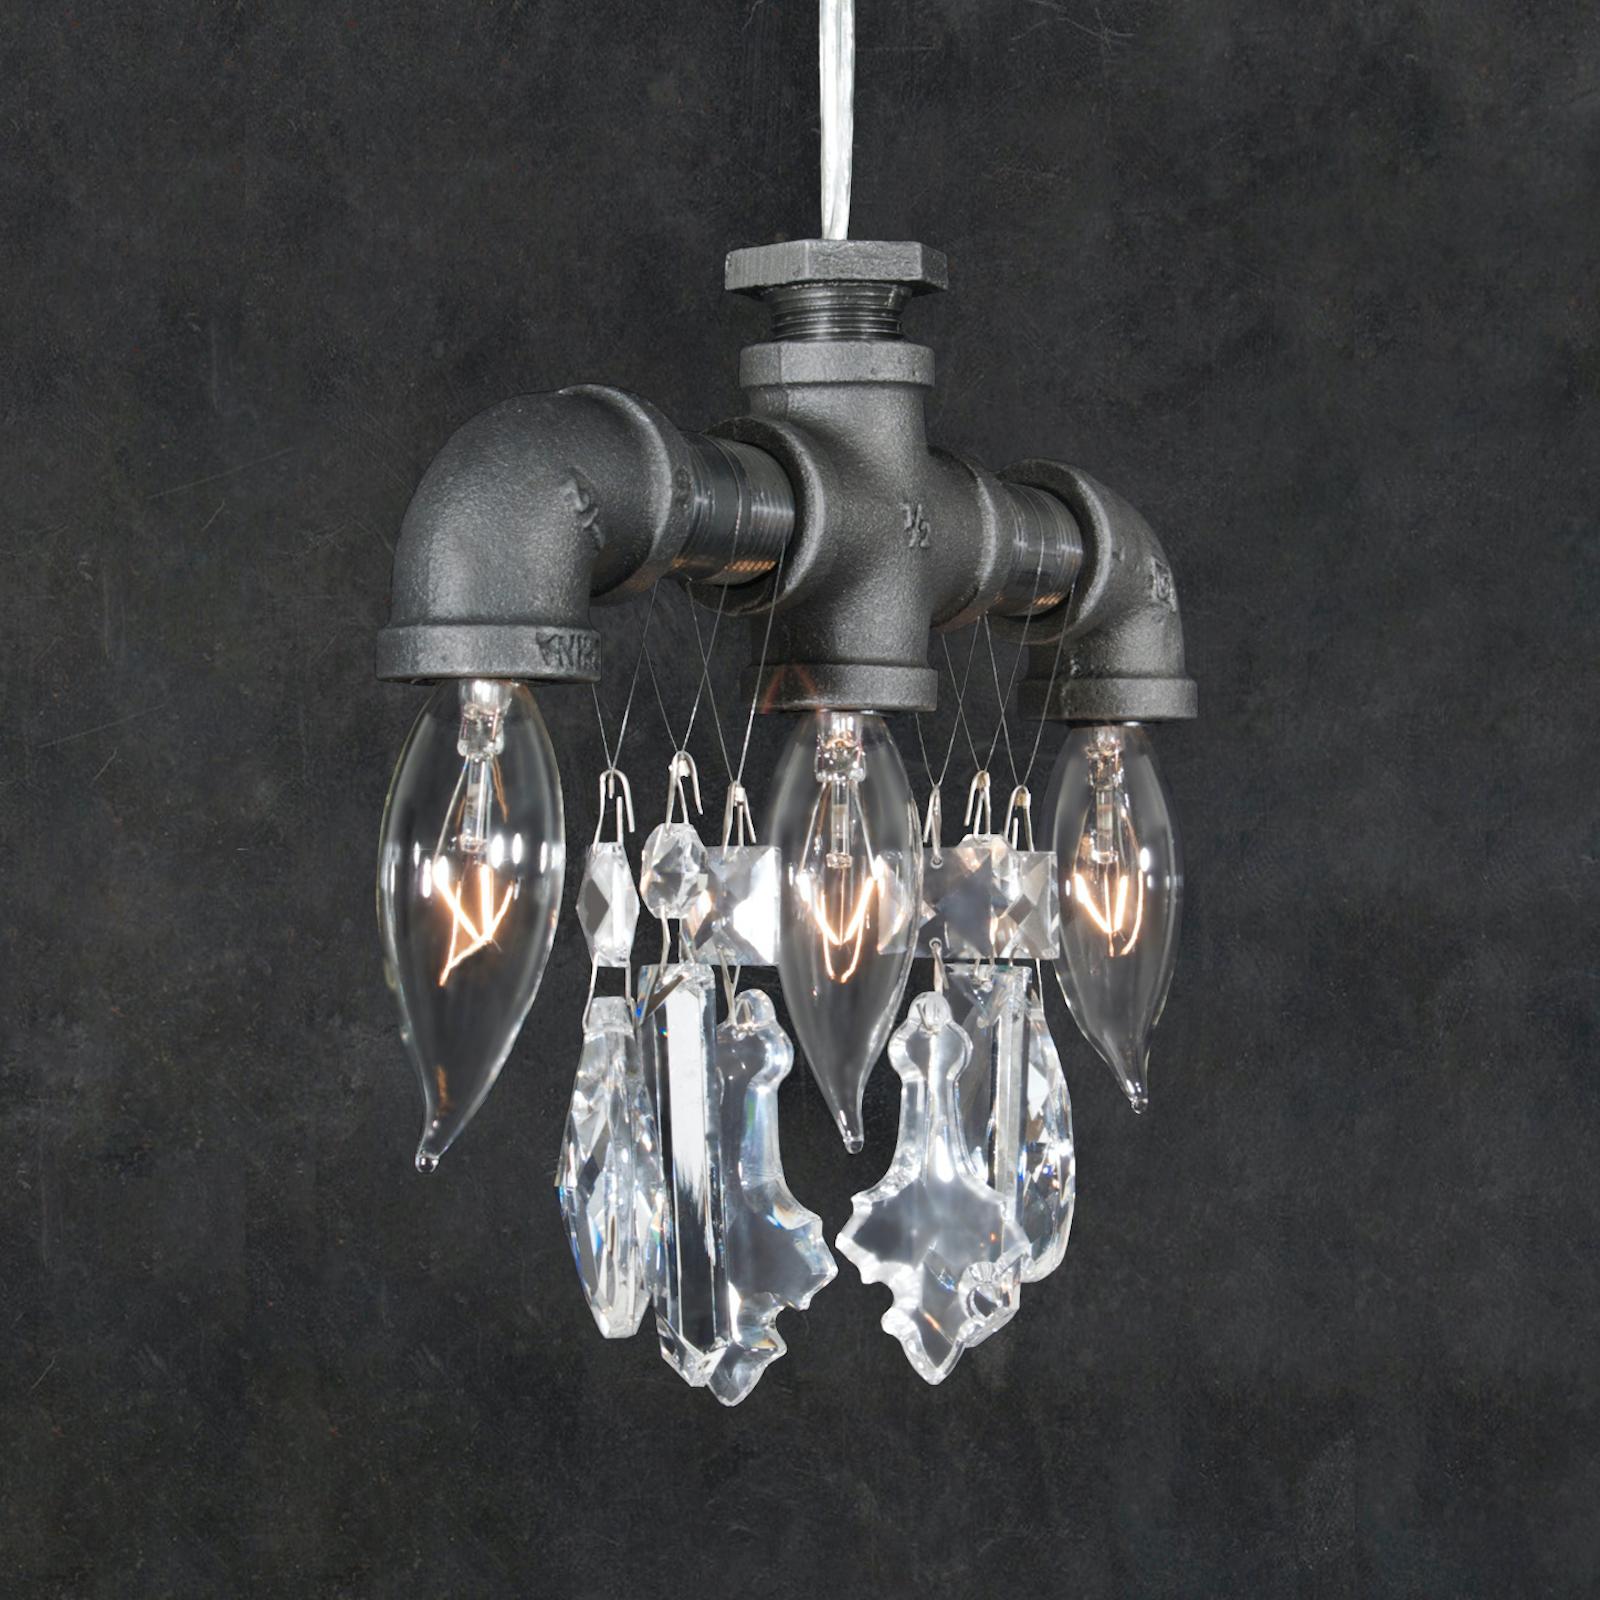 American Tribeca Chandelier Pendant, 3 Bulb, by Michael McHale For Sale